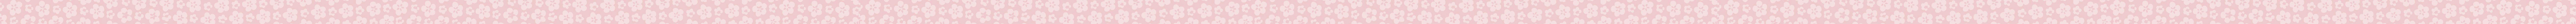 pink banner with cherry blossom print scrolling a long way to the right!